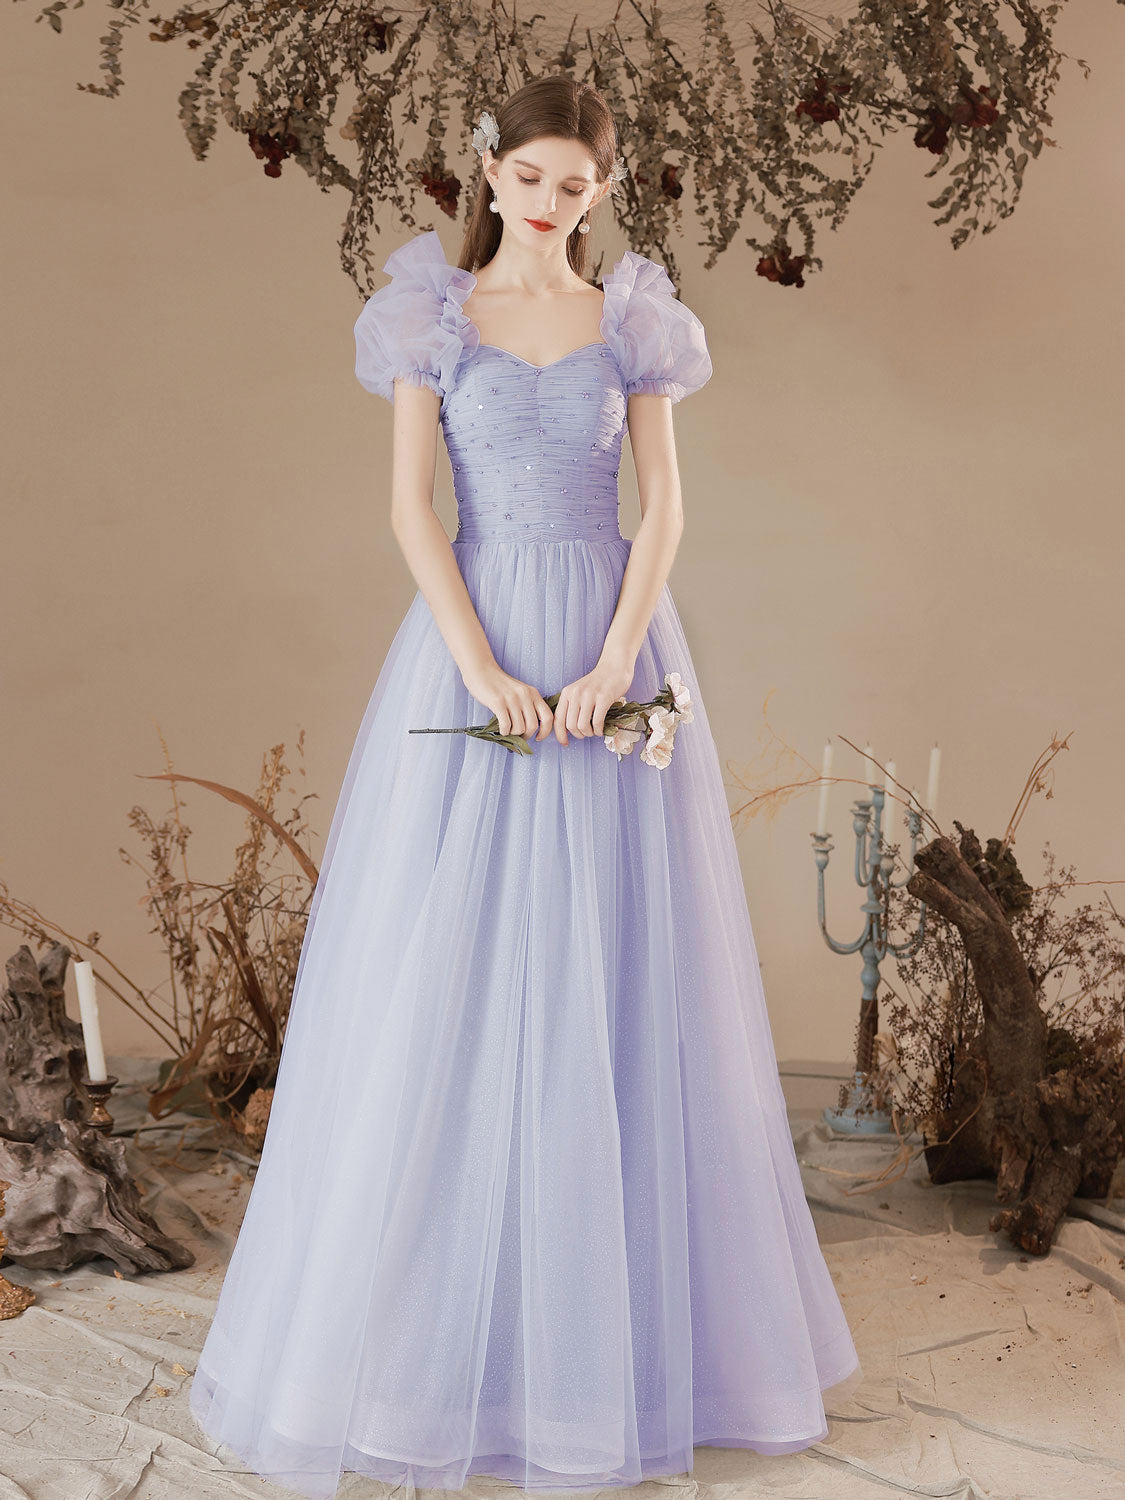 Fairy Princess Tule Lilac Formal Dress Long Party Dress - DollyGown